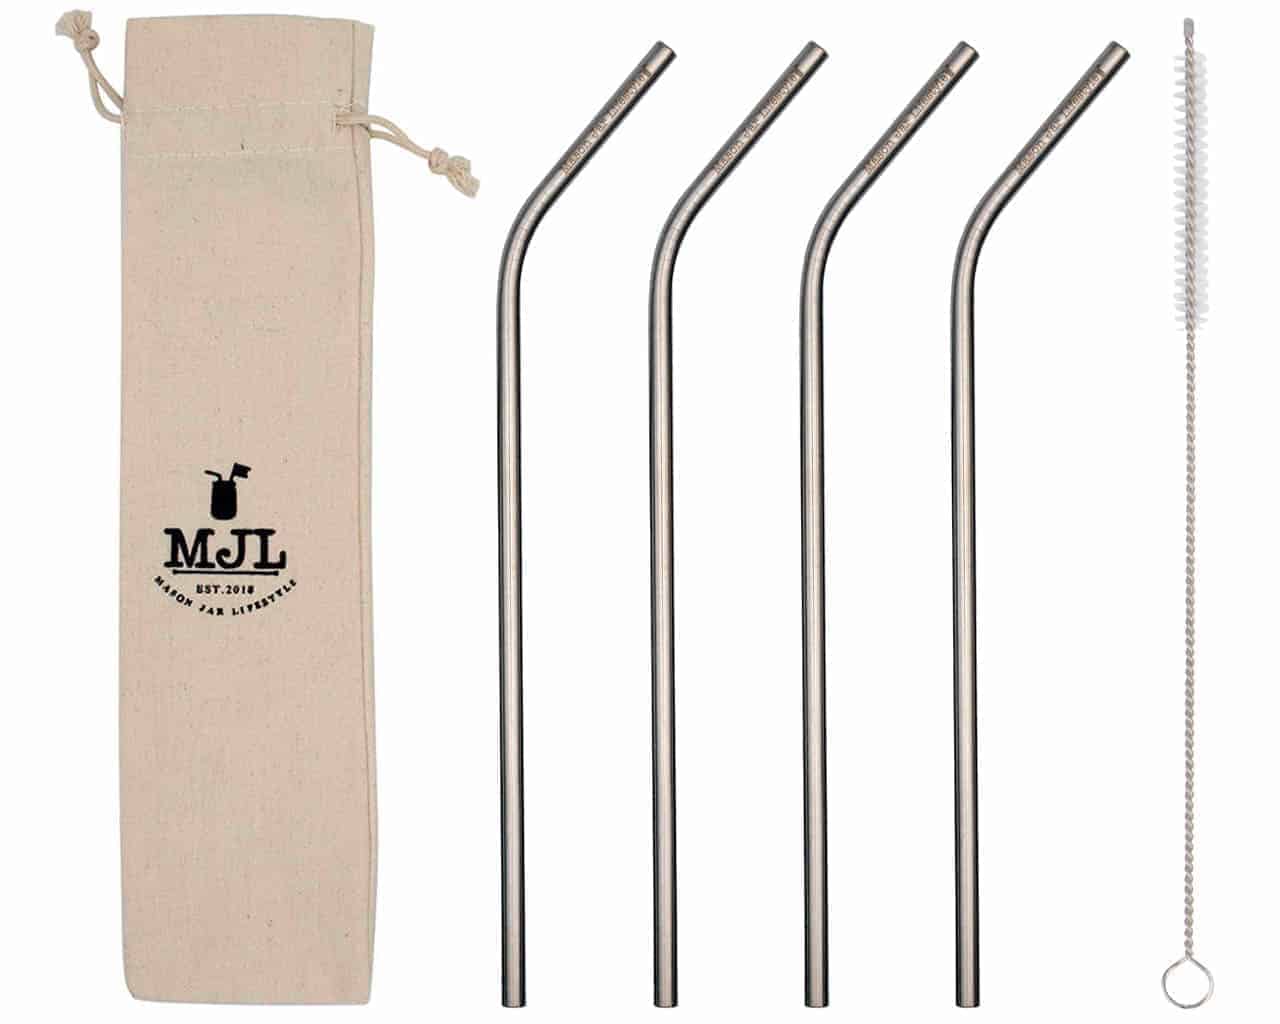 Mason Jar Lifestyle Long thin bent stainless steel metal straws for quart 32oz Mason jars, large cups, and tall glasses